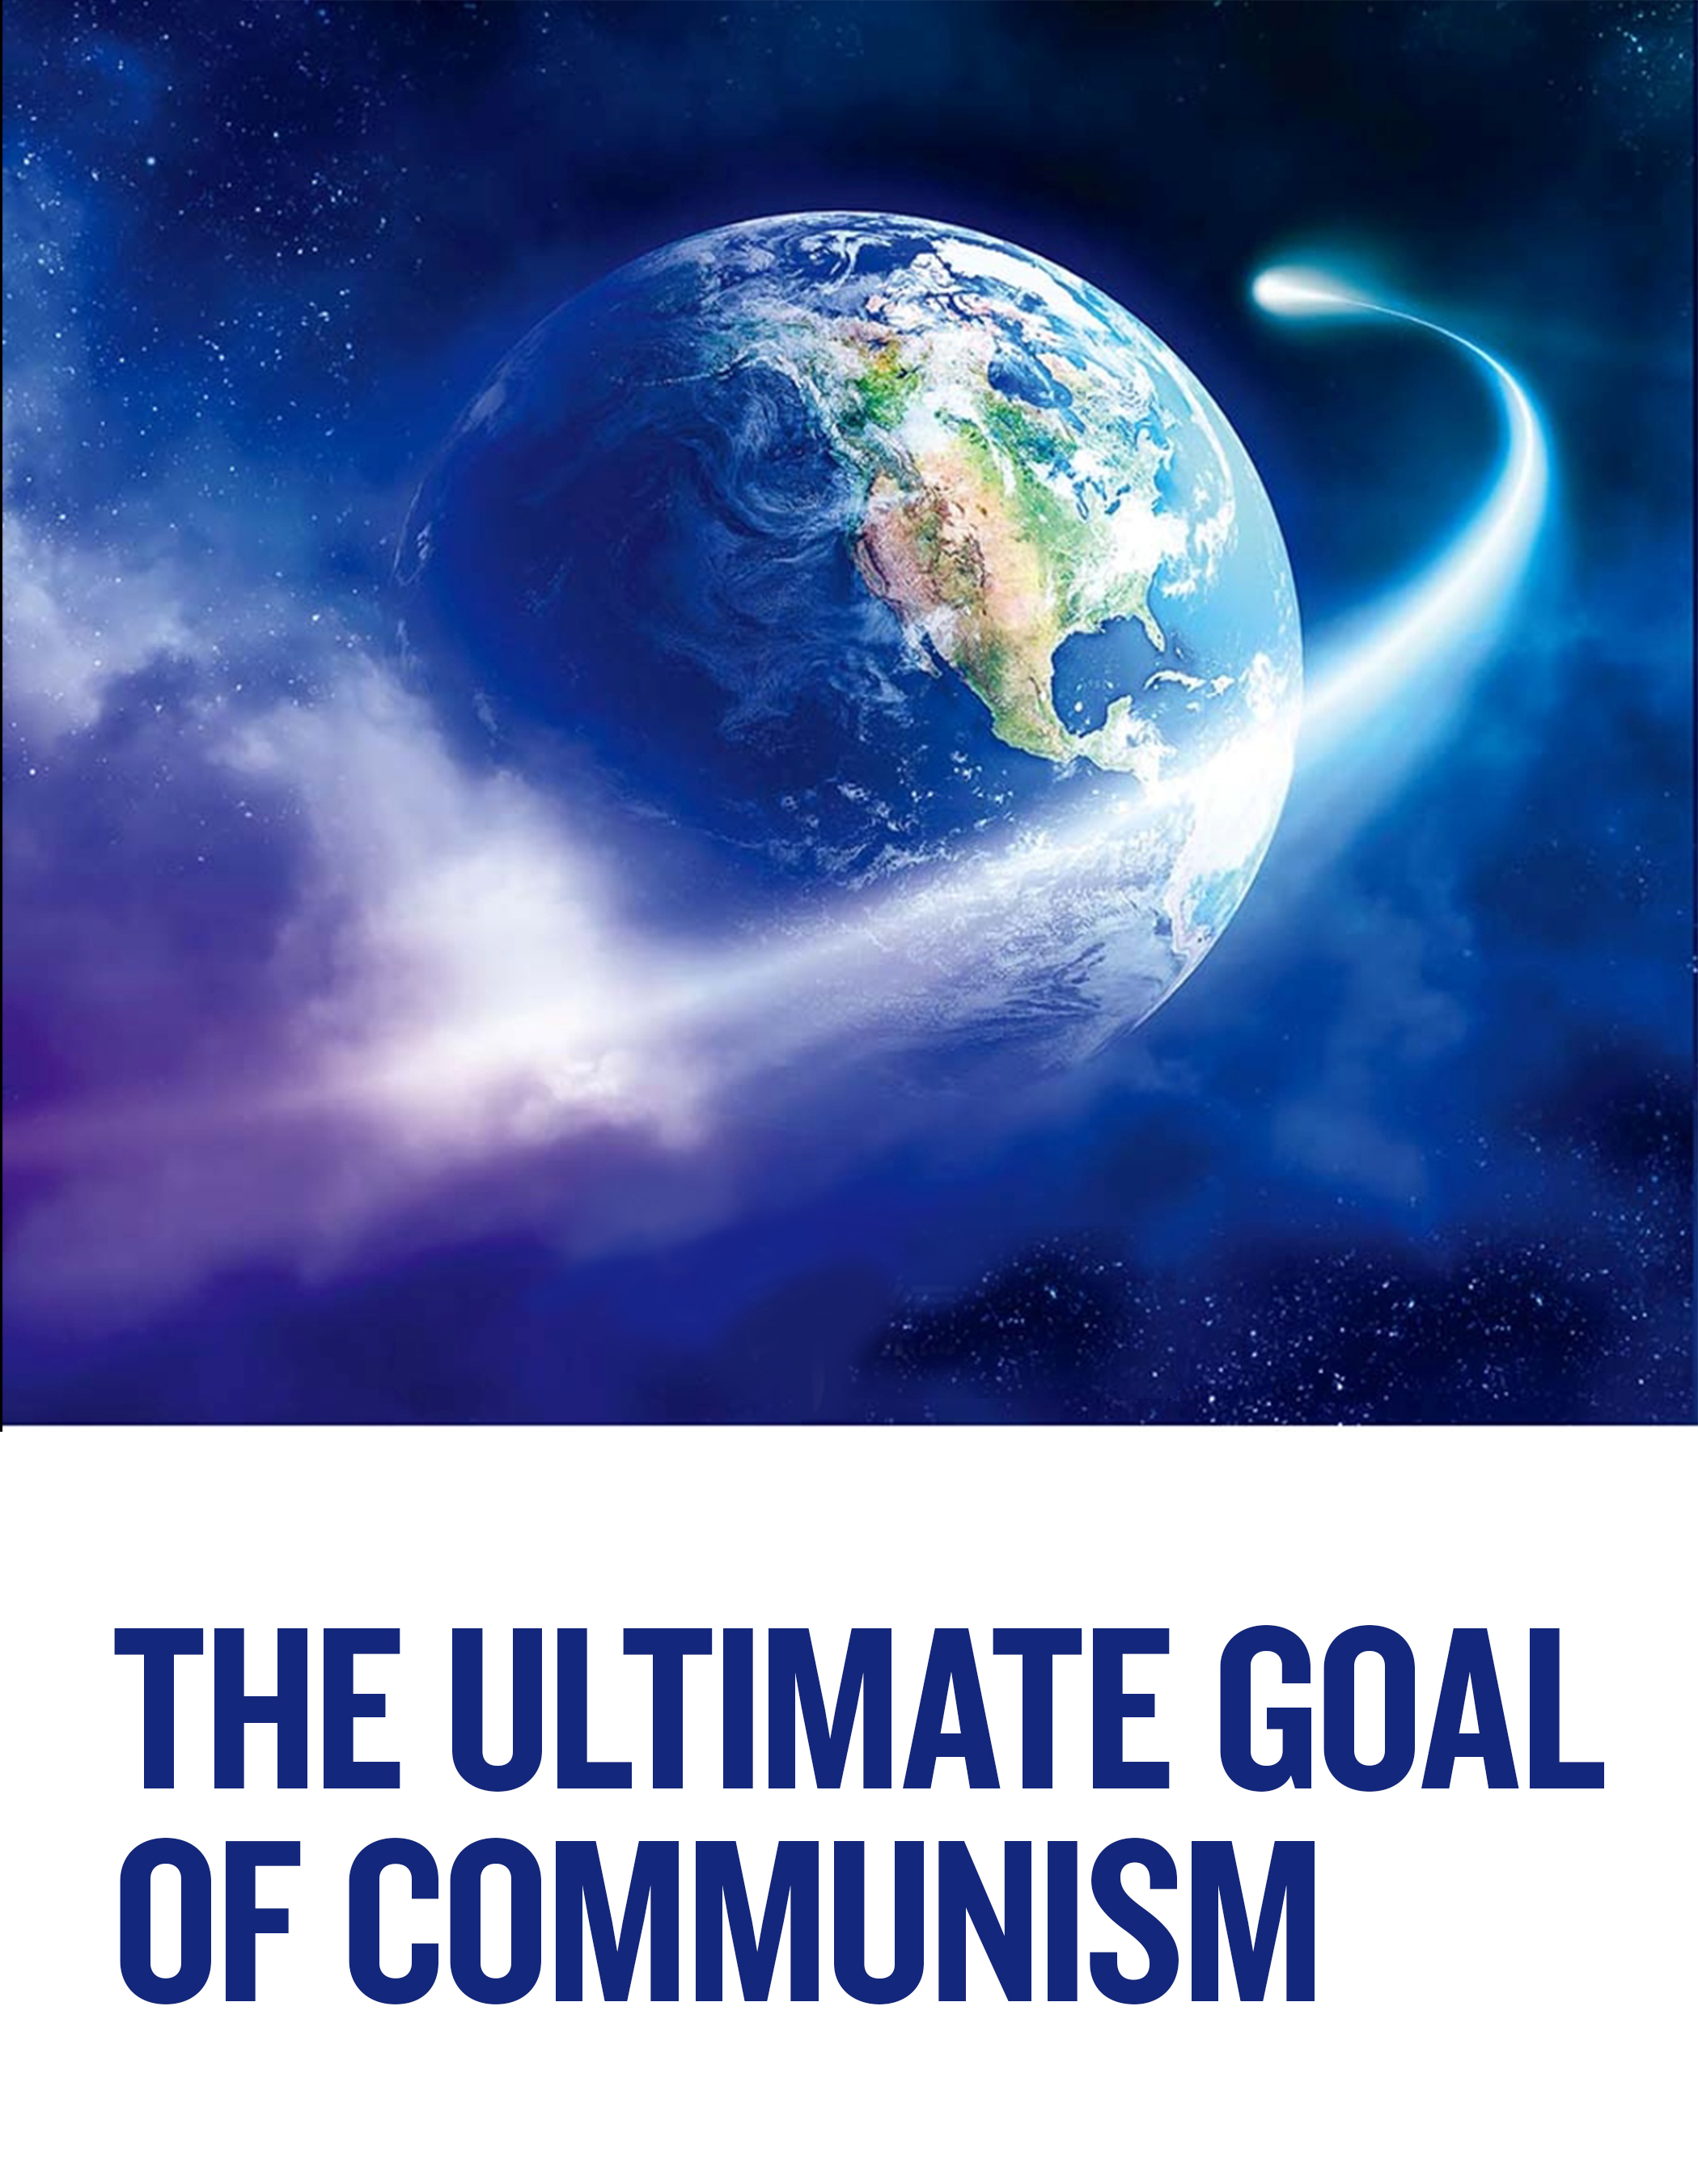 The Ultimate Goal of Communism